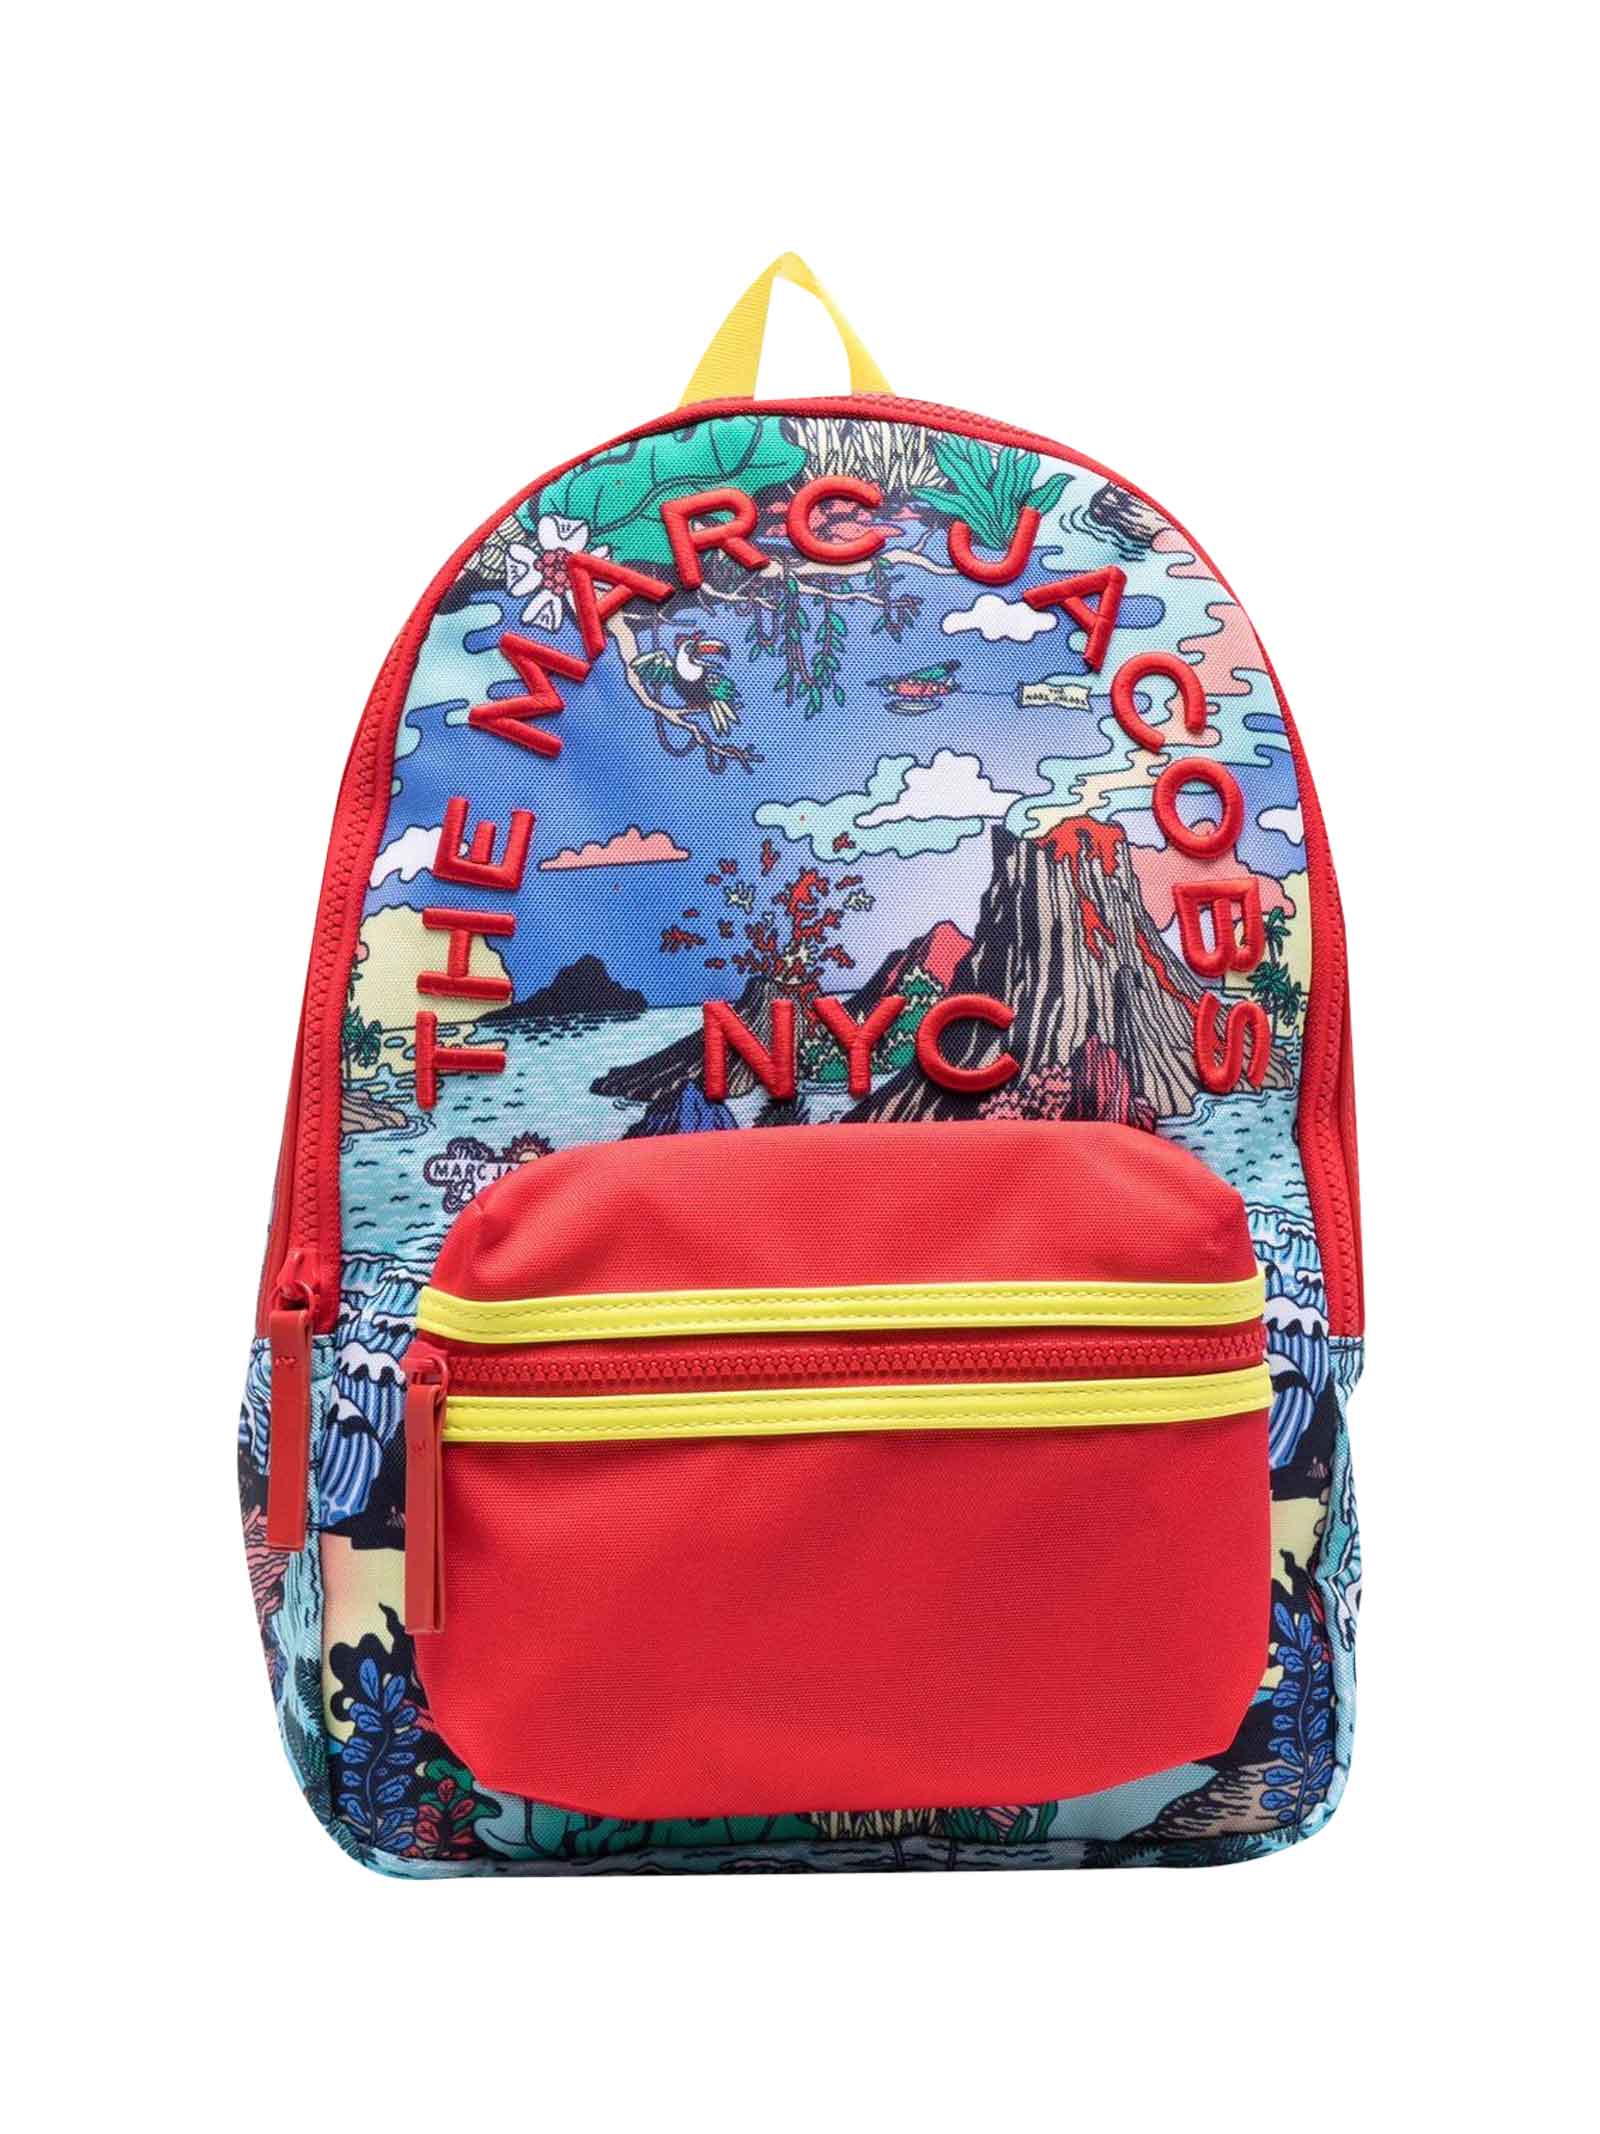 Little Marc Jacobs The Marc Jacobs Kids Patterned Backpack